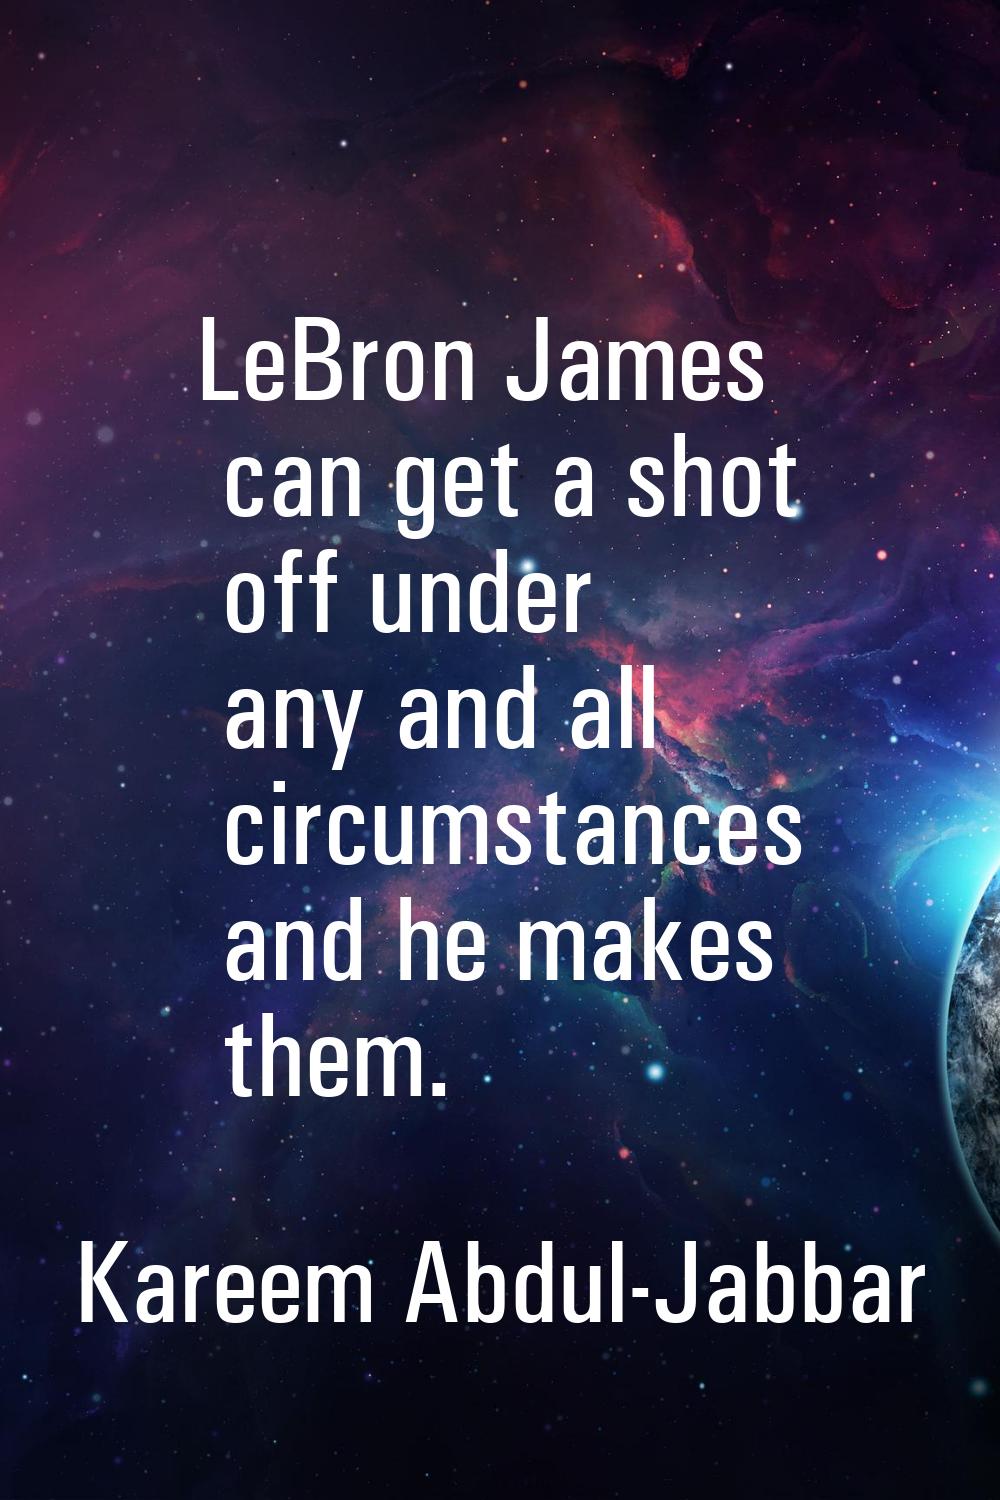 LeBron James can get a shot off under any and all circumstances and he makes them.